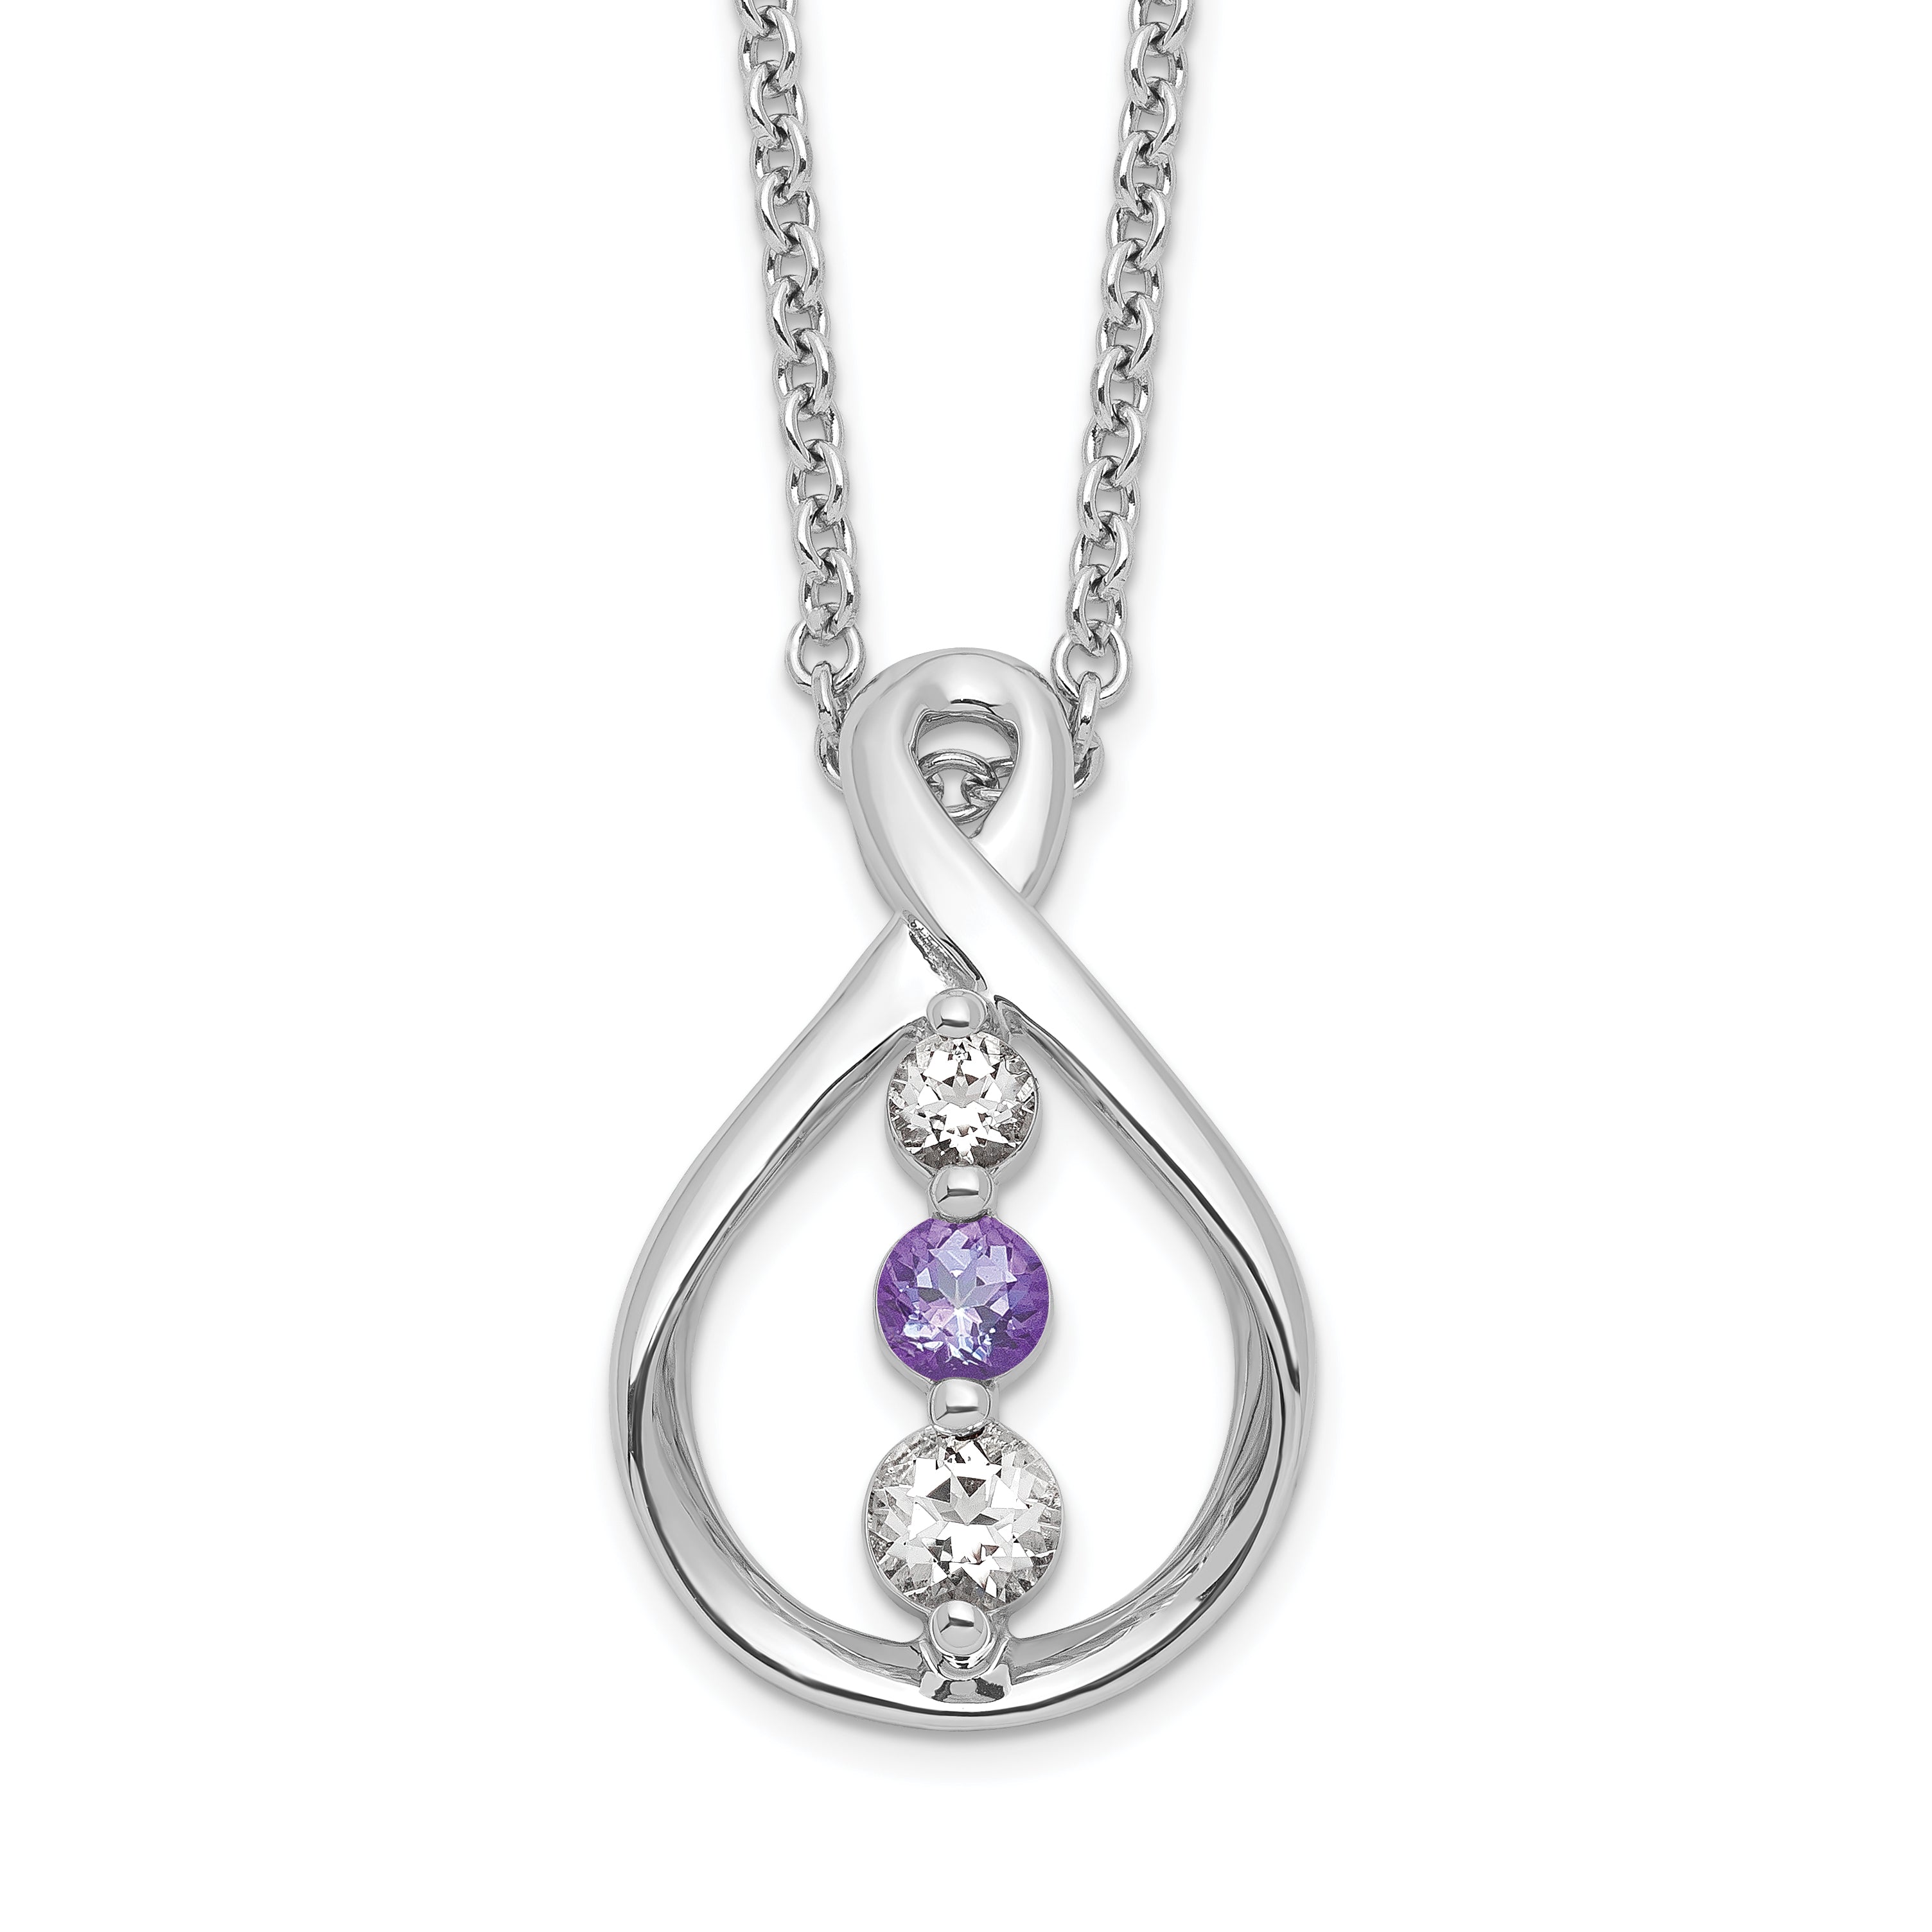 Survivor Collection Sterling Silver Rhodium-plated 16 Inch White and Purple Swarovski Topaz Runzi Necklace with 2 Inch Extender